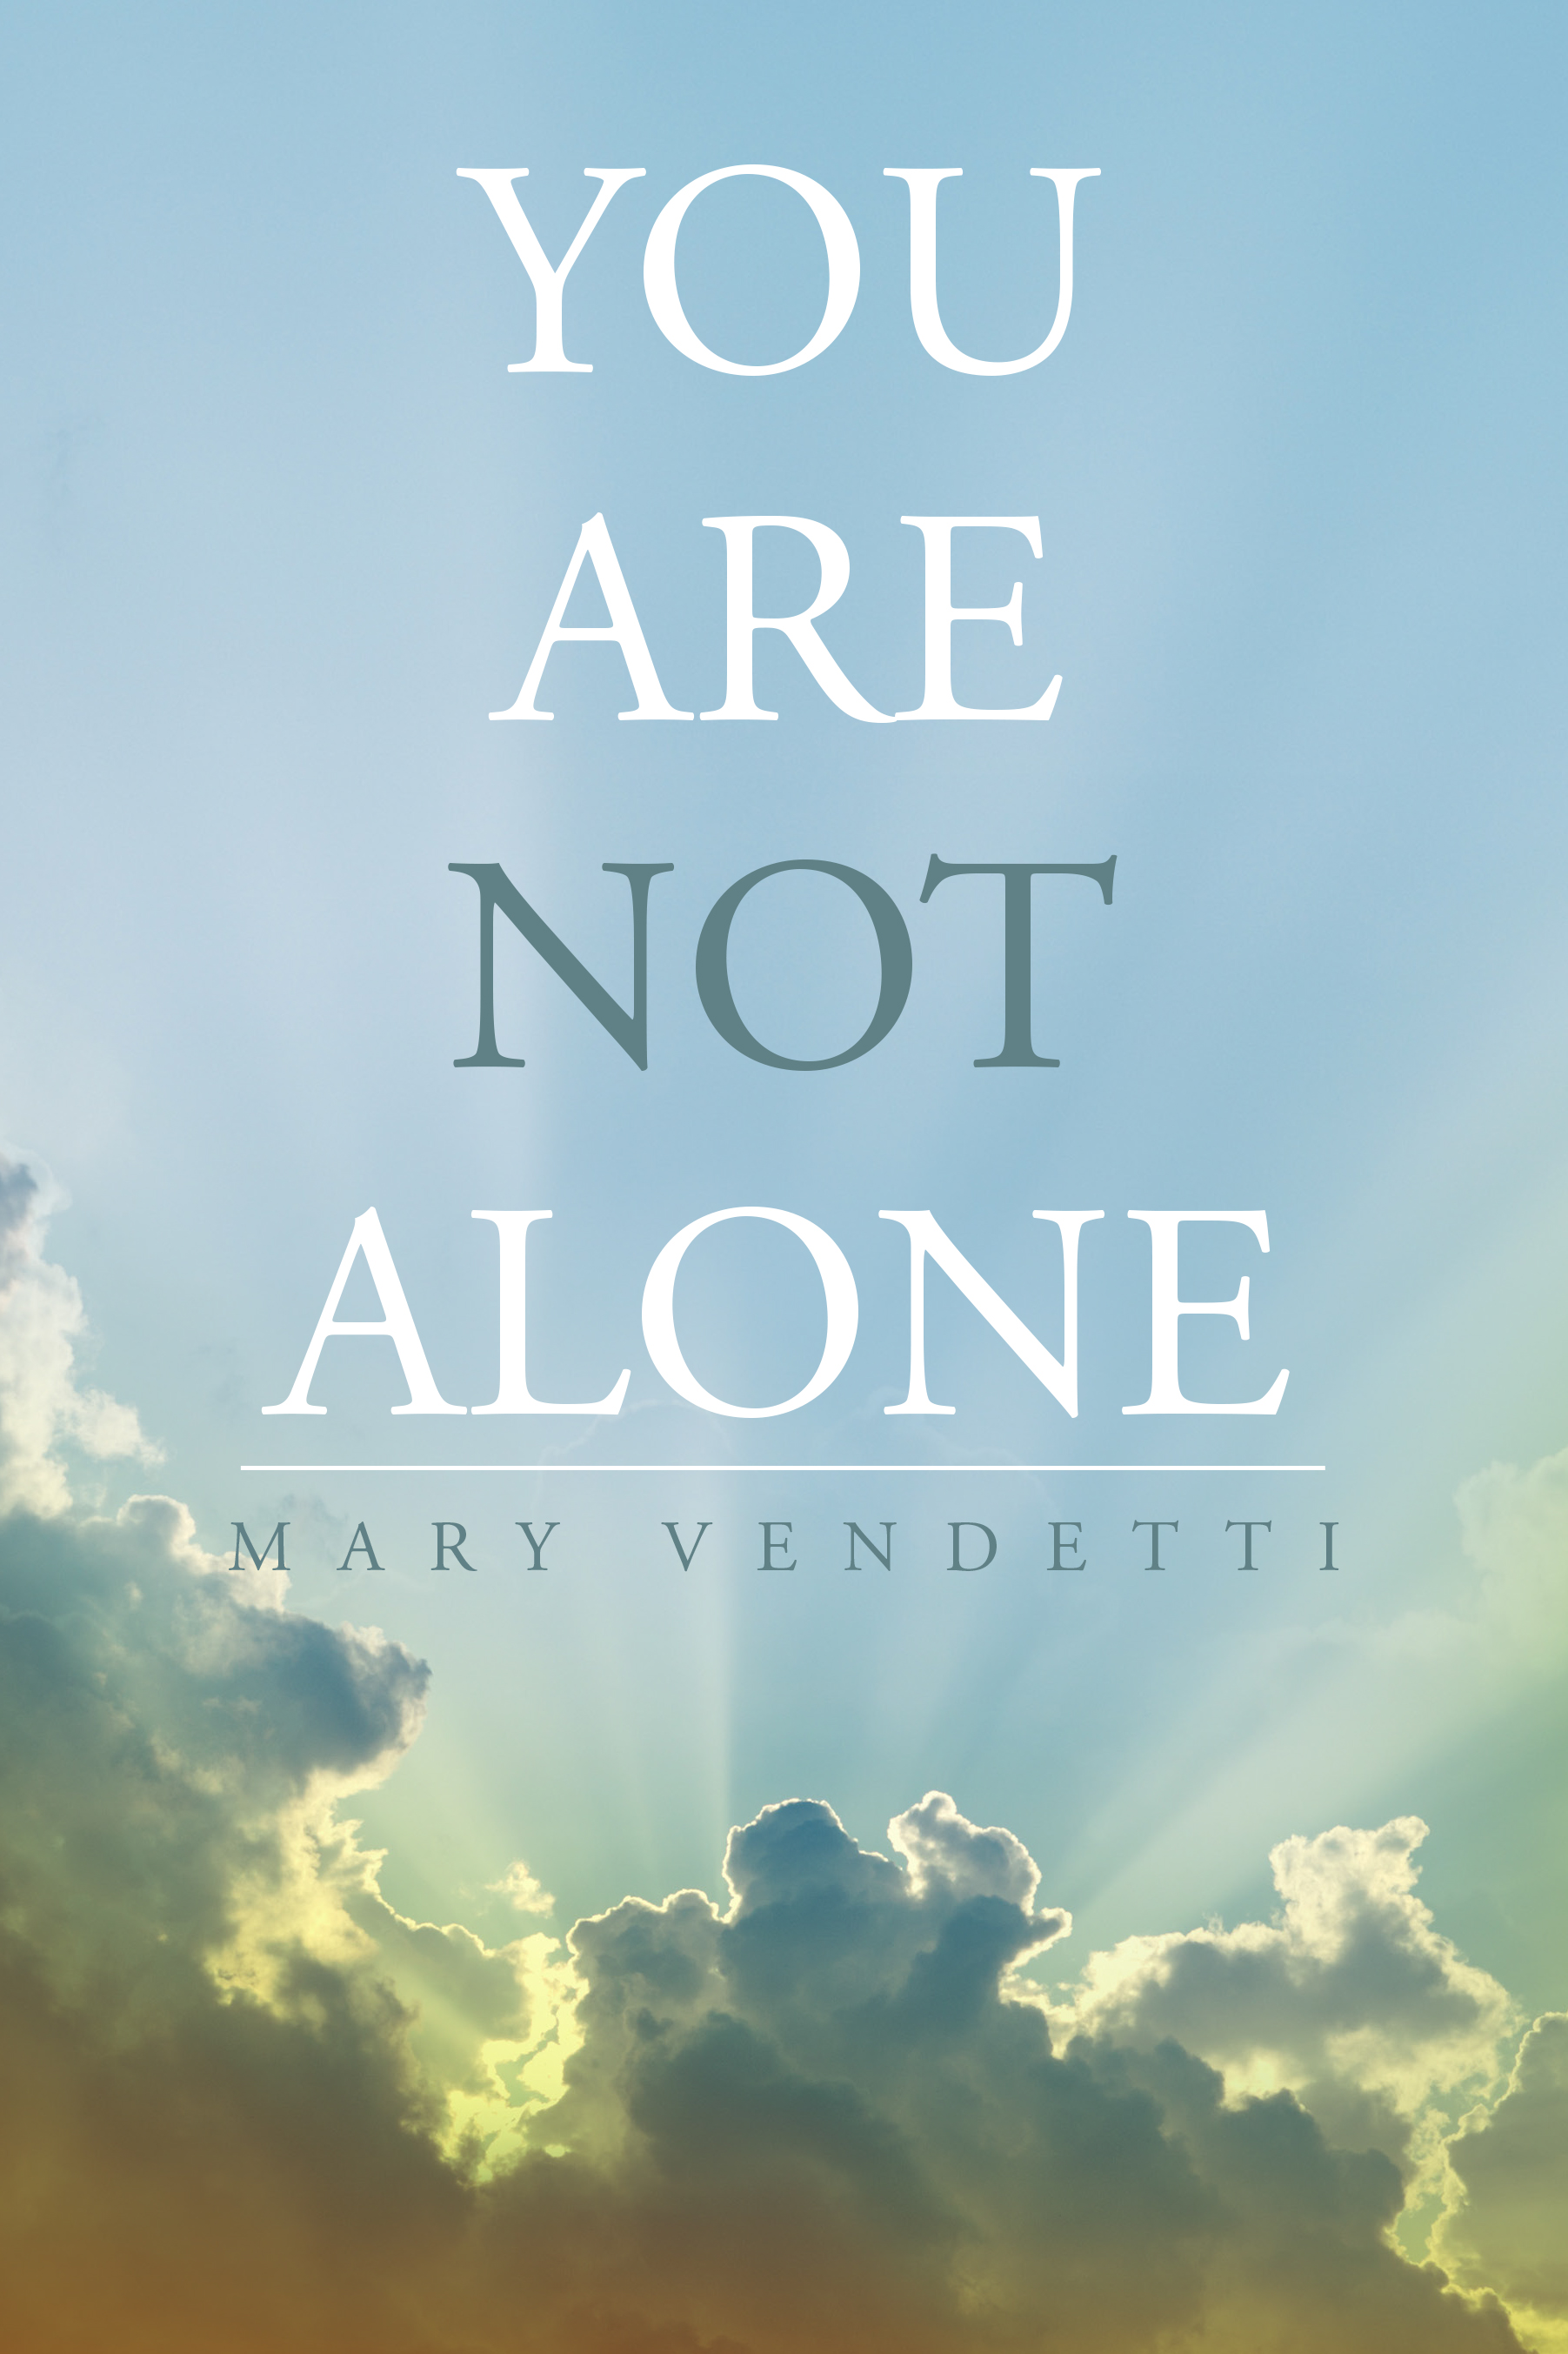 You Are Not Alone Cover Image